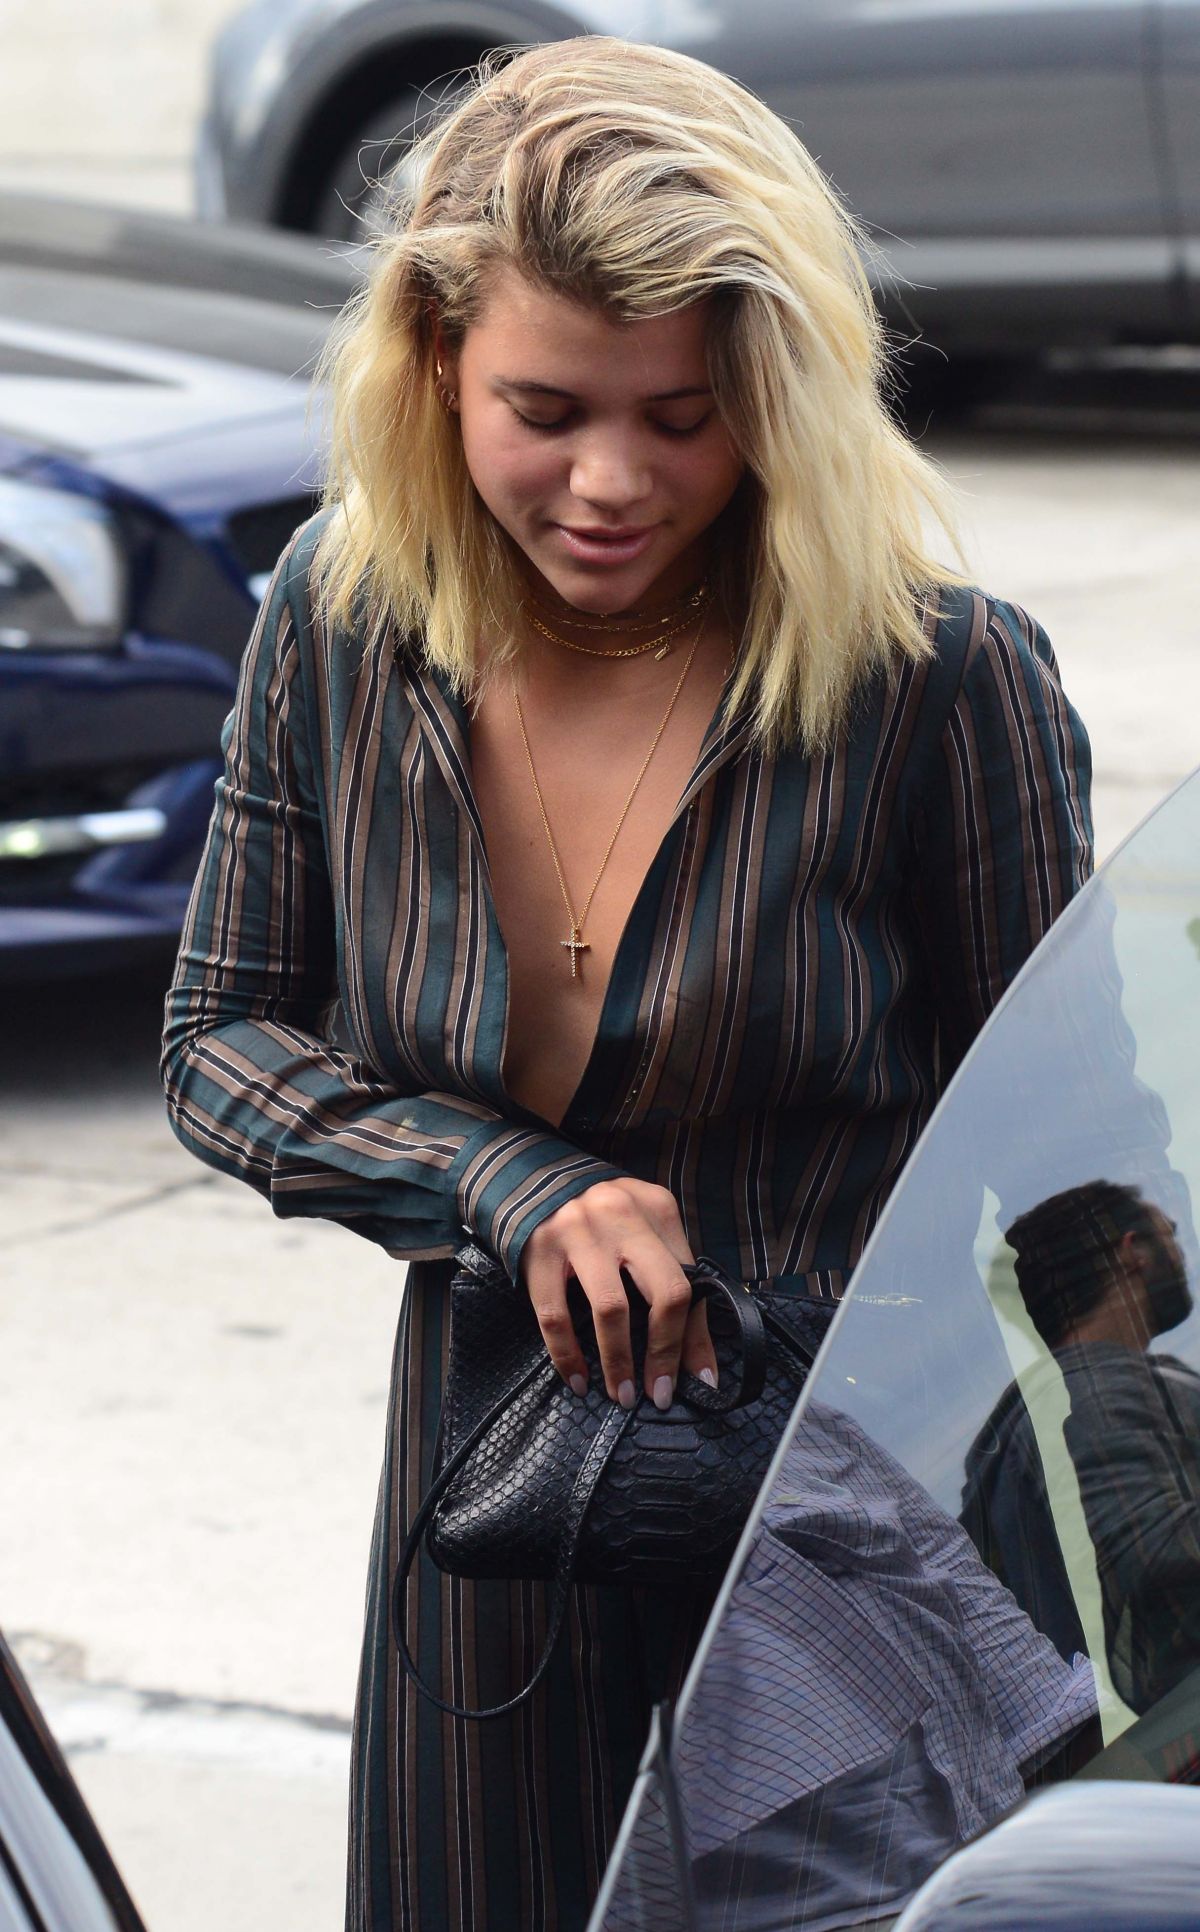 sofia-richie-out-shopping-in-beverly-hills-09-21-2016_17.